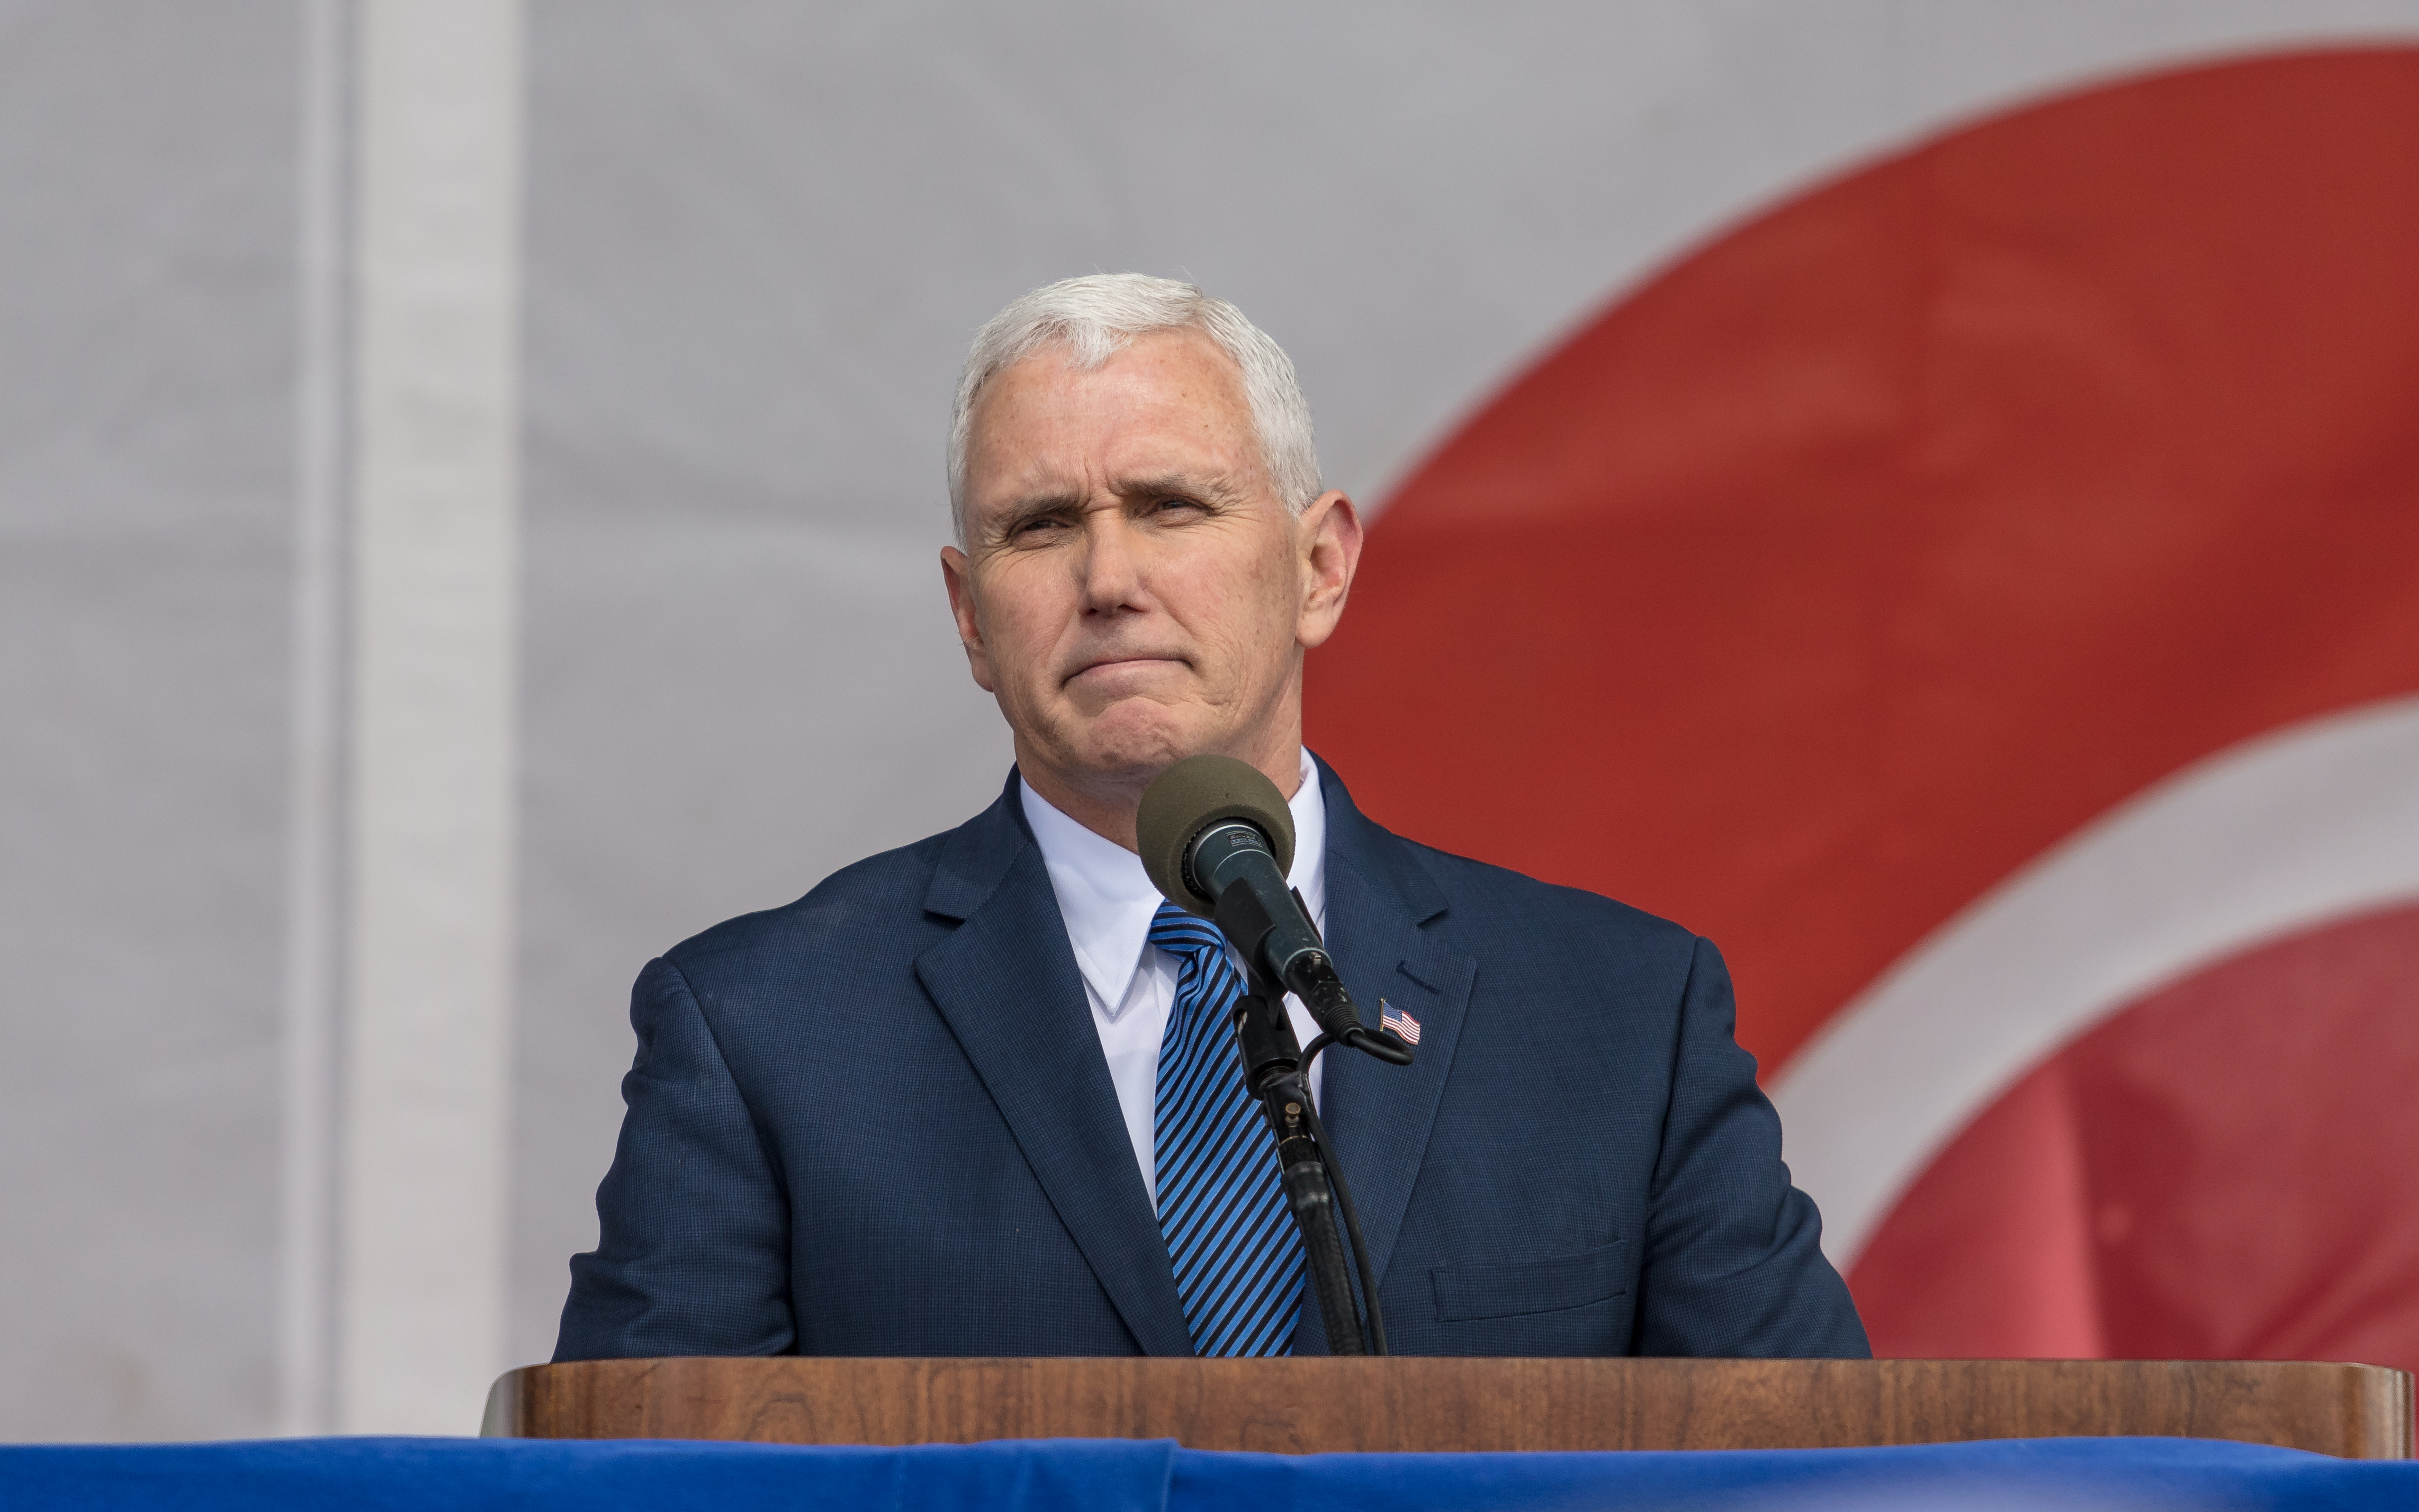 Vice President Mike Pence addressing the March for Life